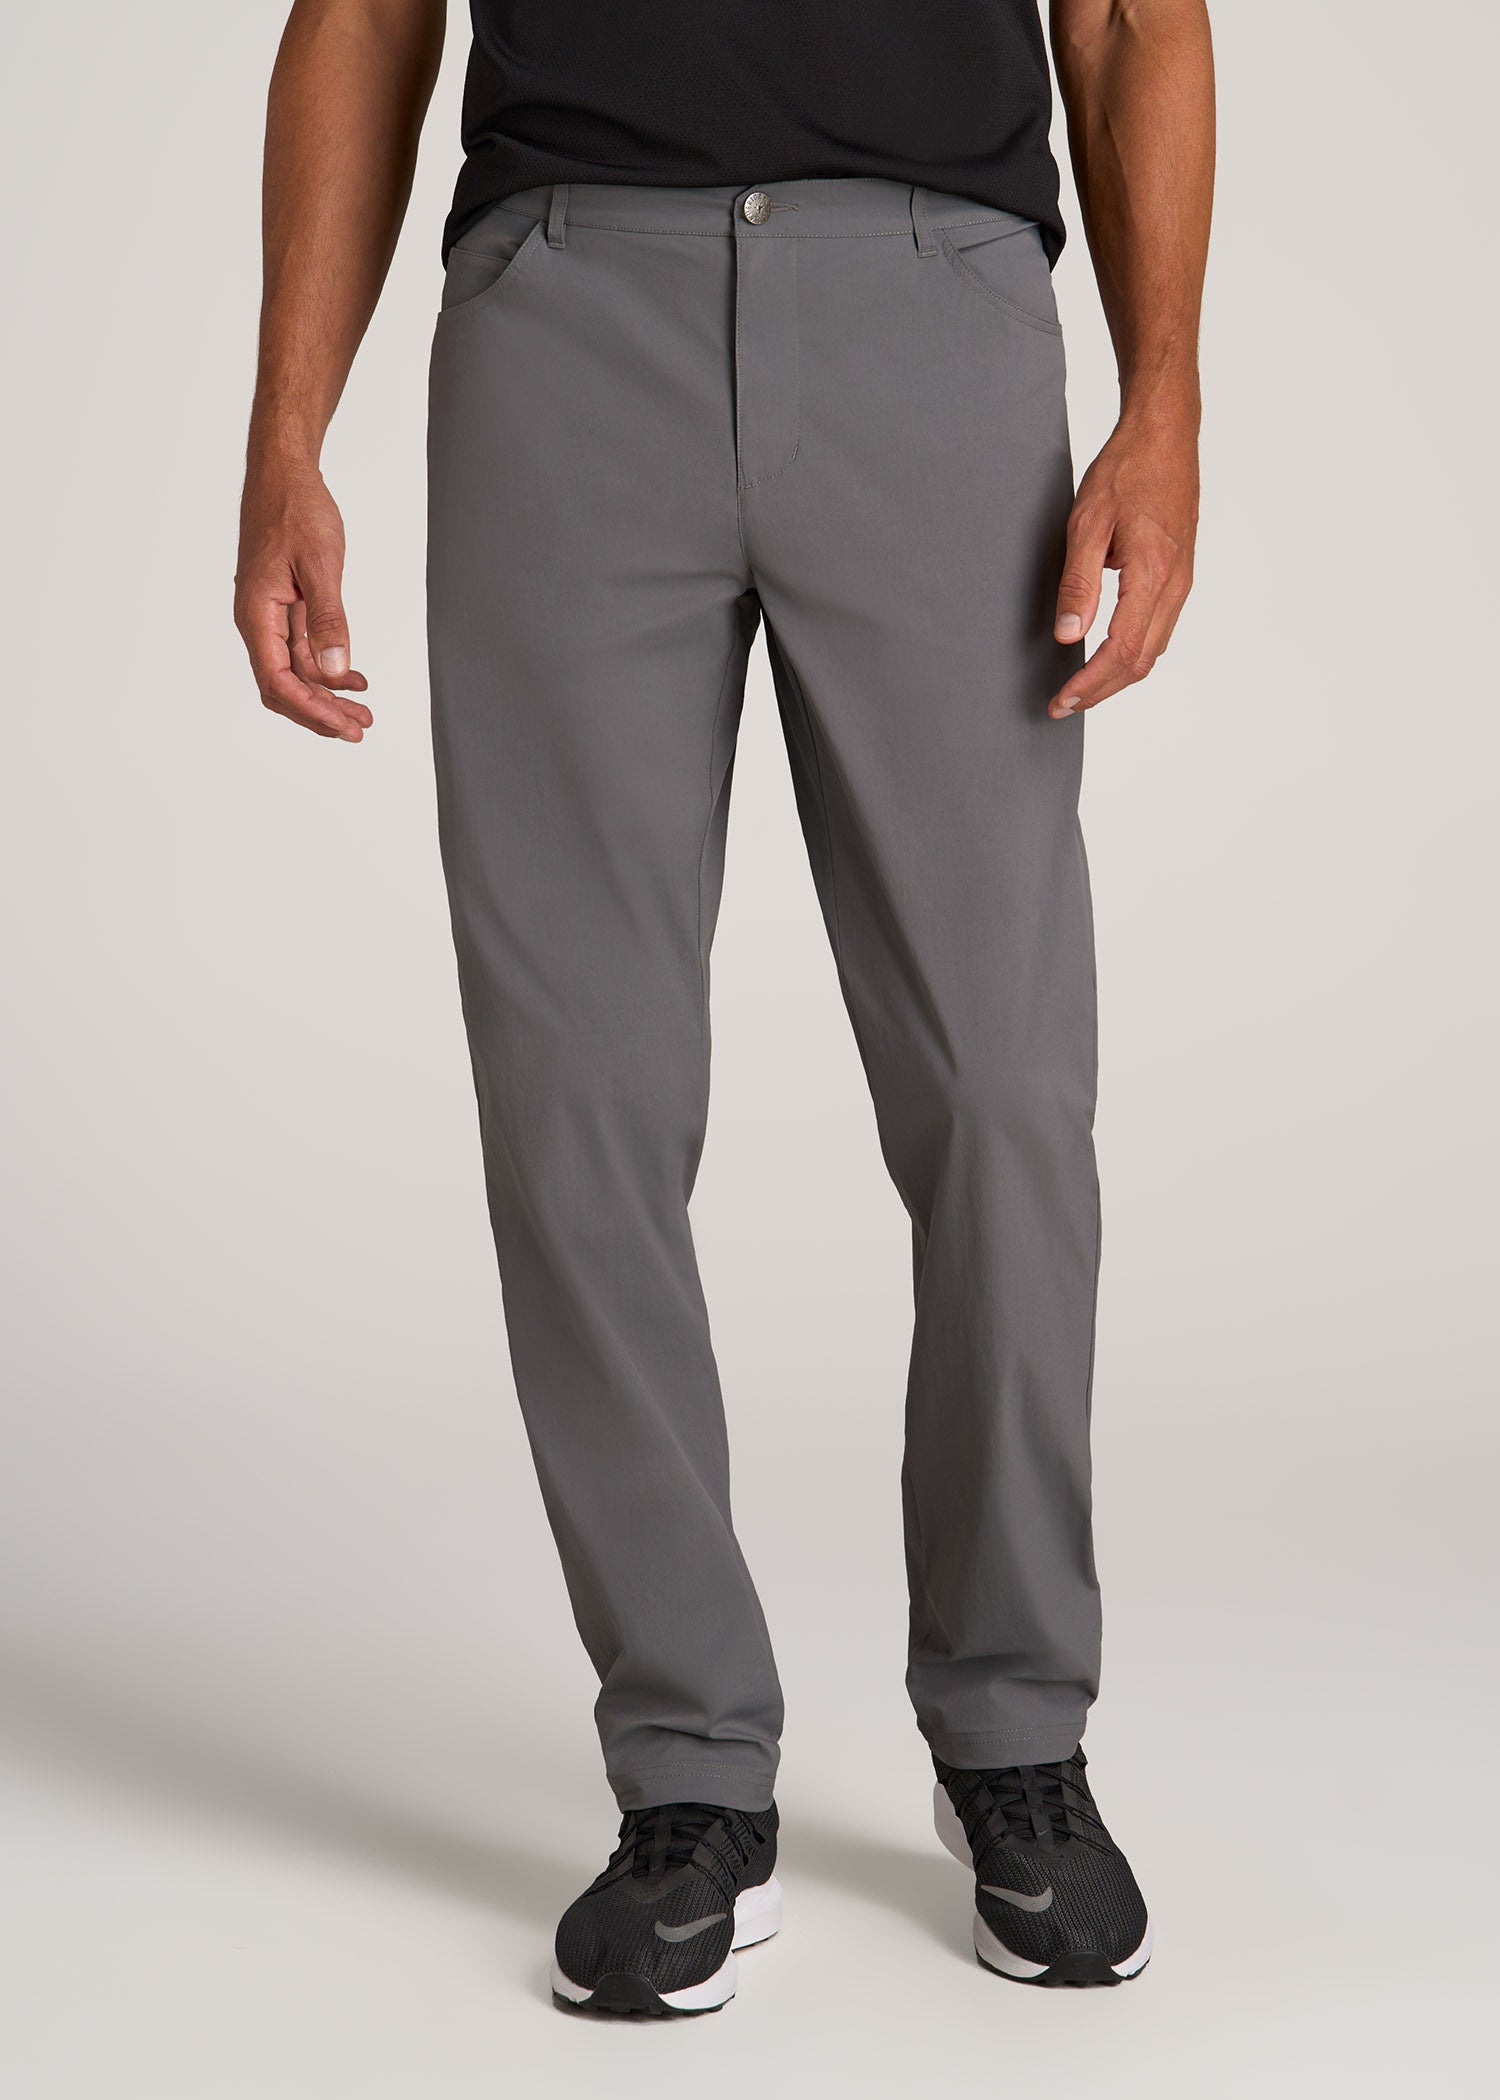 Men's Pants & Chinos: Tapered